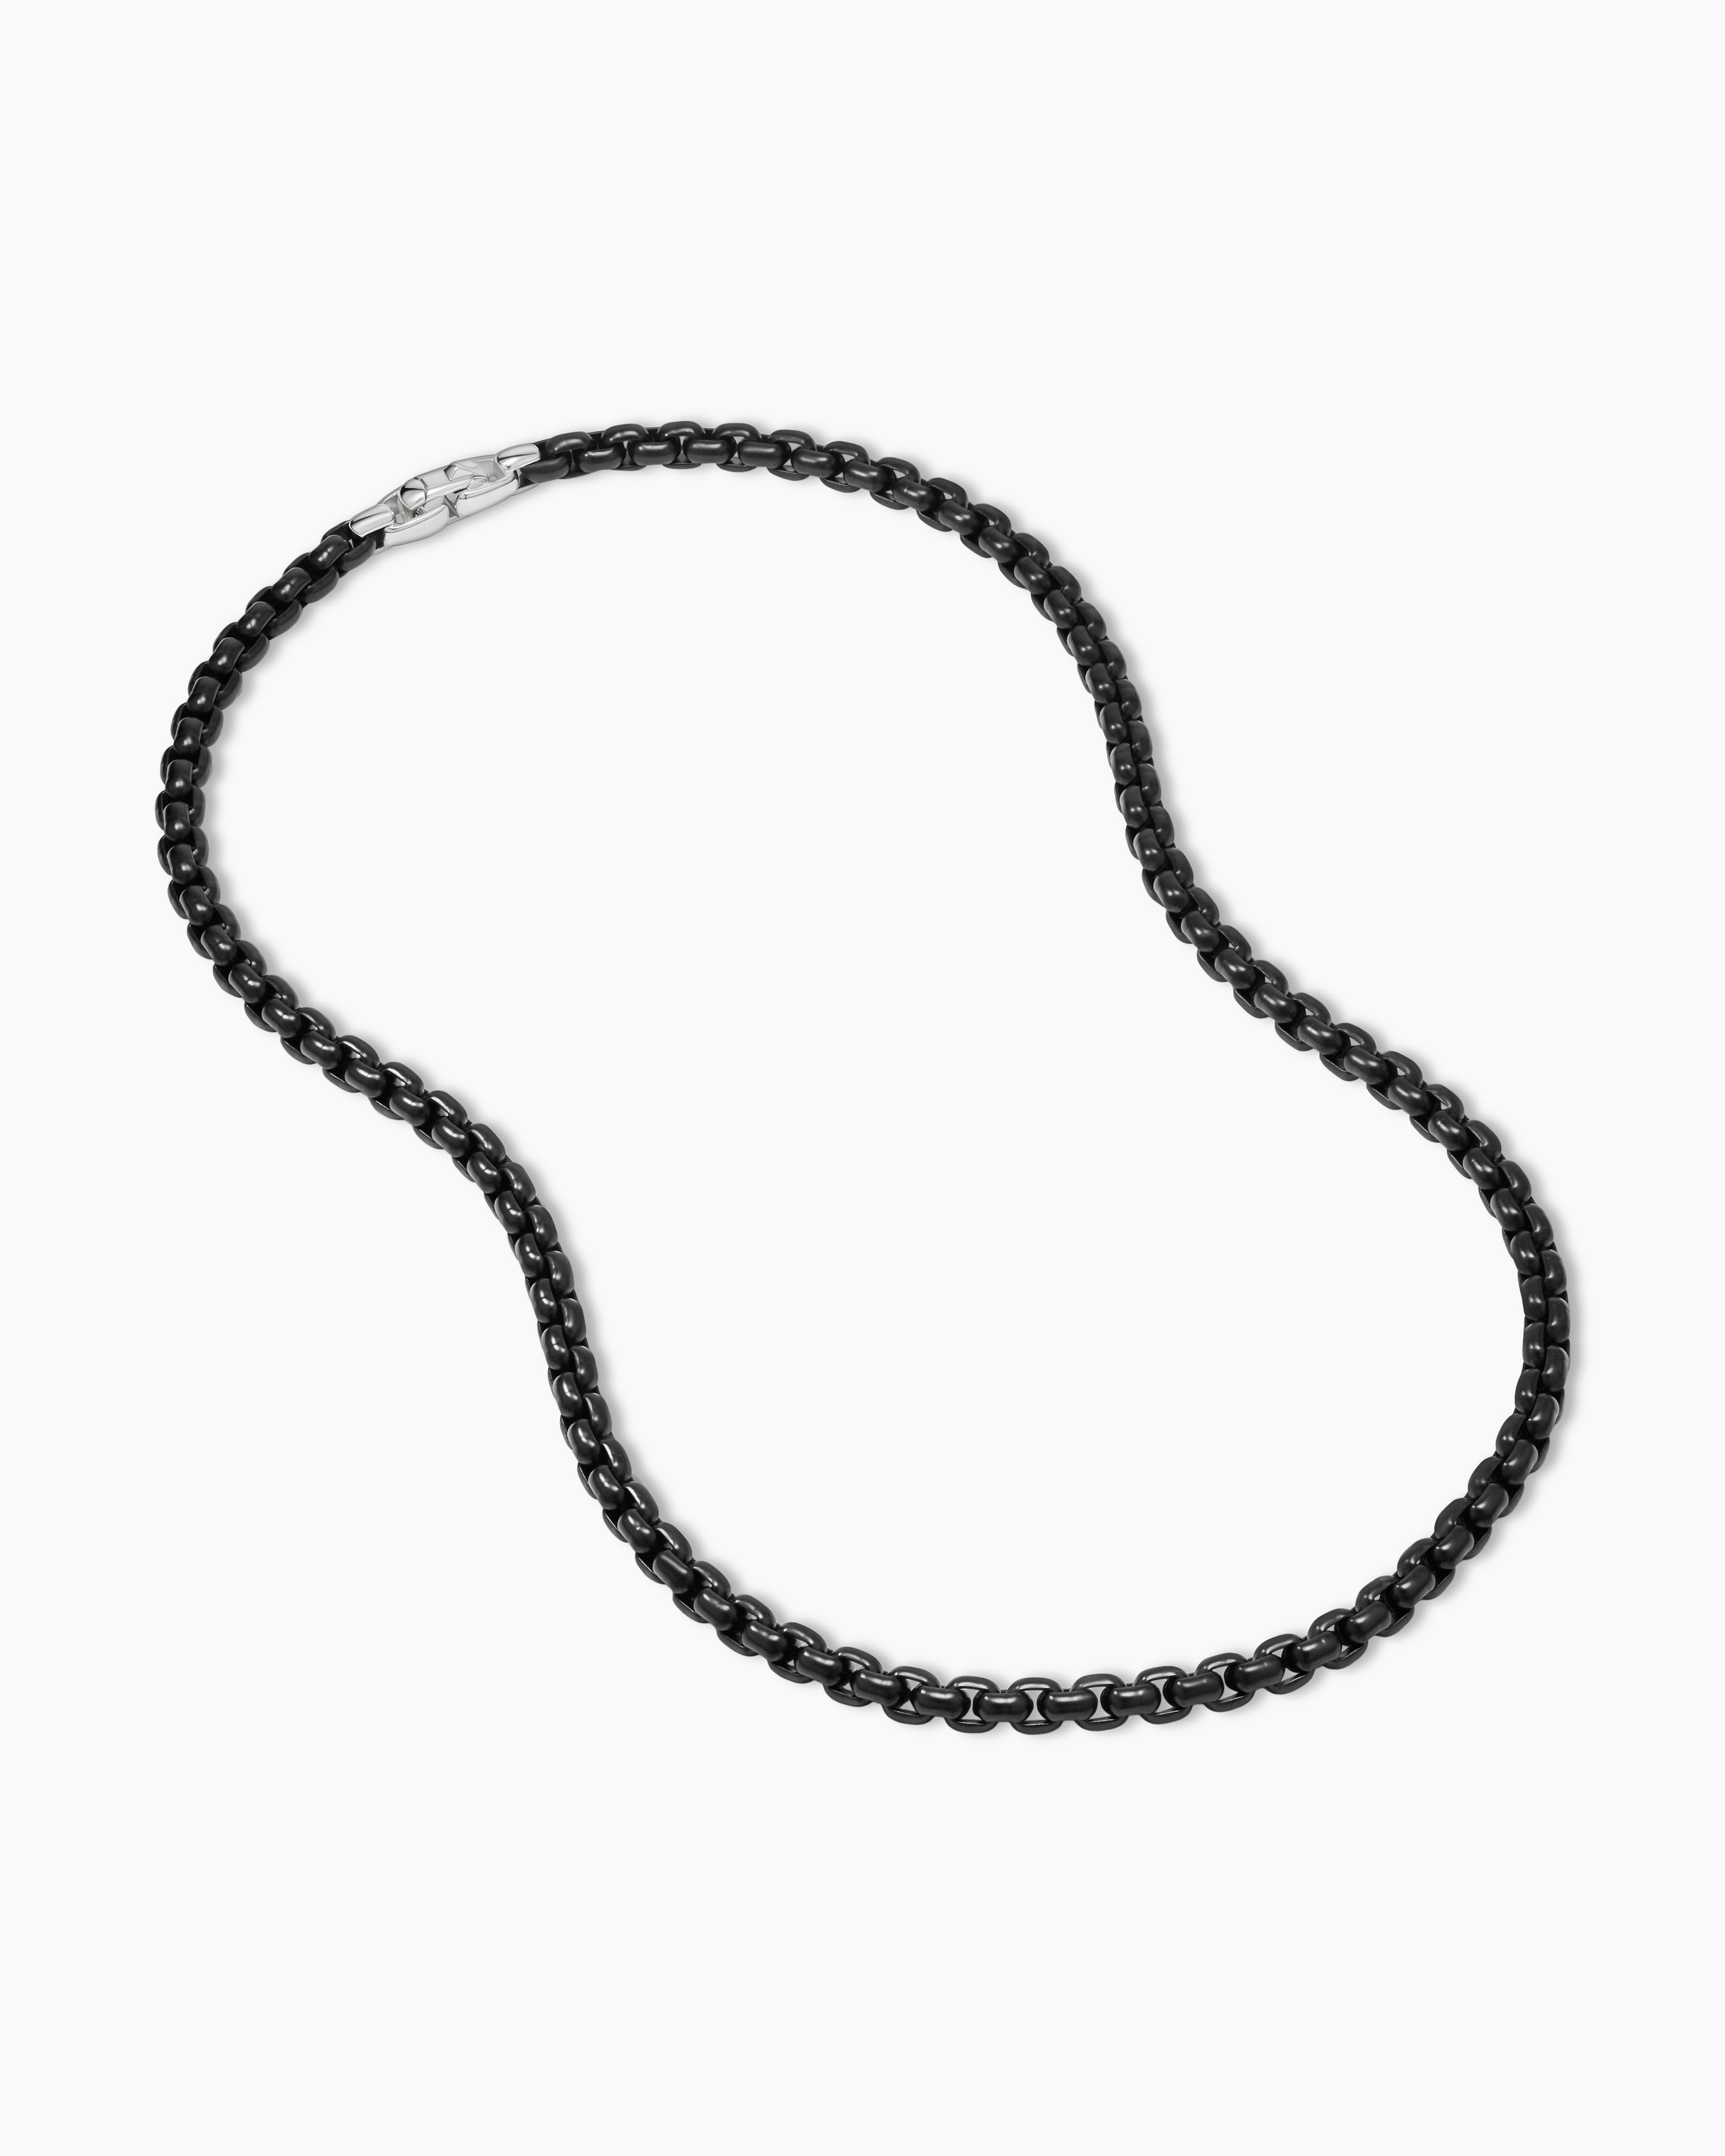 Golden Stainless Steel Rope Chain Necklace For Men Boys